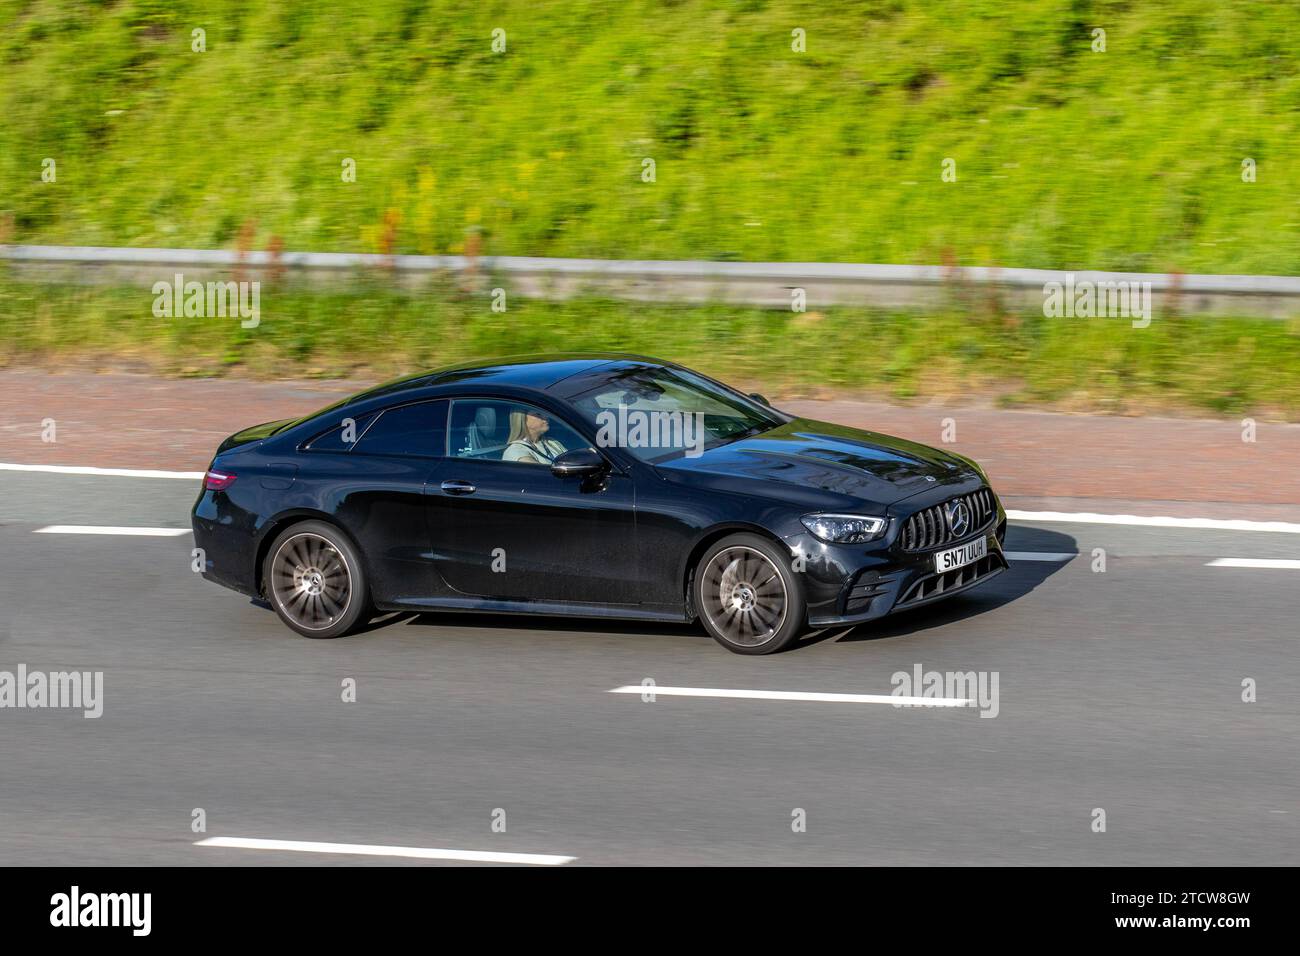 2021 Black Mercedes-Benz E 300 Amg Ln Ngt Ed Prm+Mhev A E300 9G-Tronic Auto MHEV EQ Boost 272 14Hp/10Kw Start/Stop Car Coupe Hybrid Electric1991 cc travelling on the M6 motorway UK Stock Photo